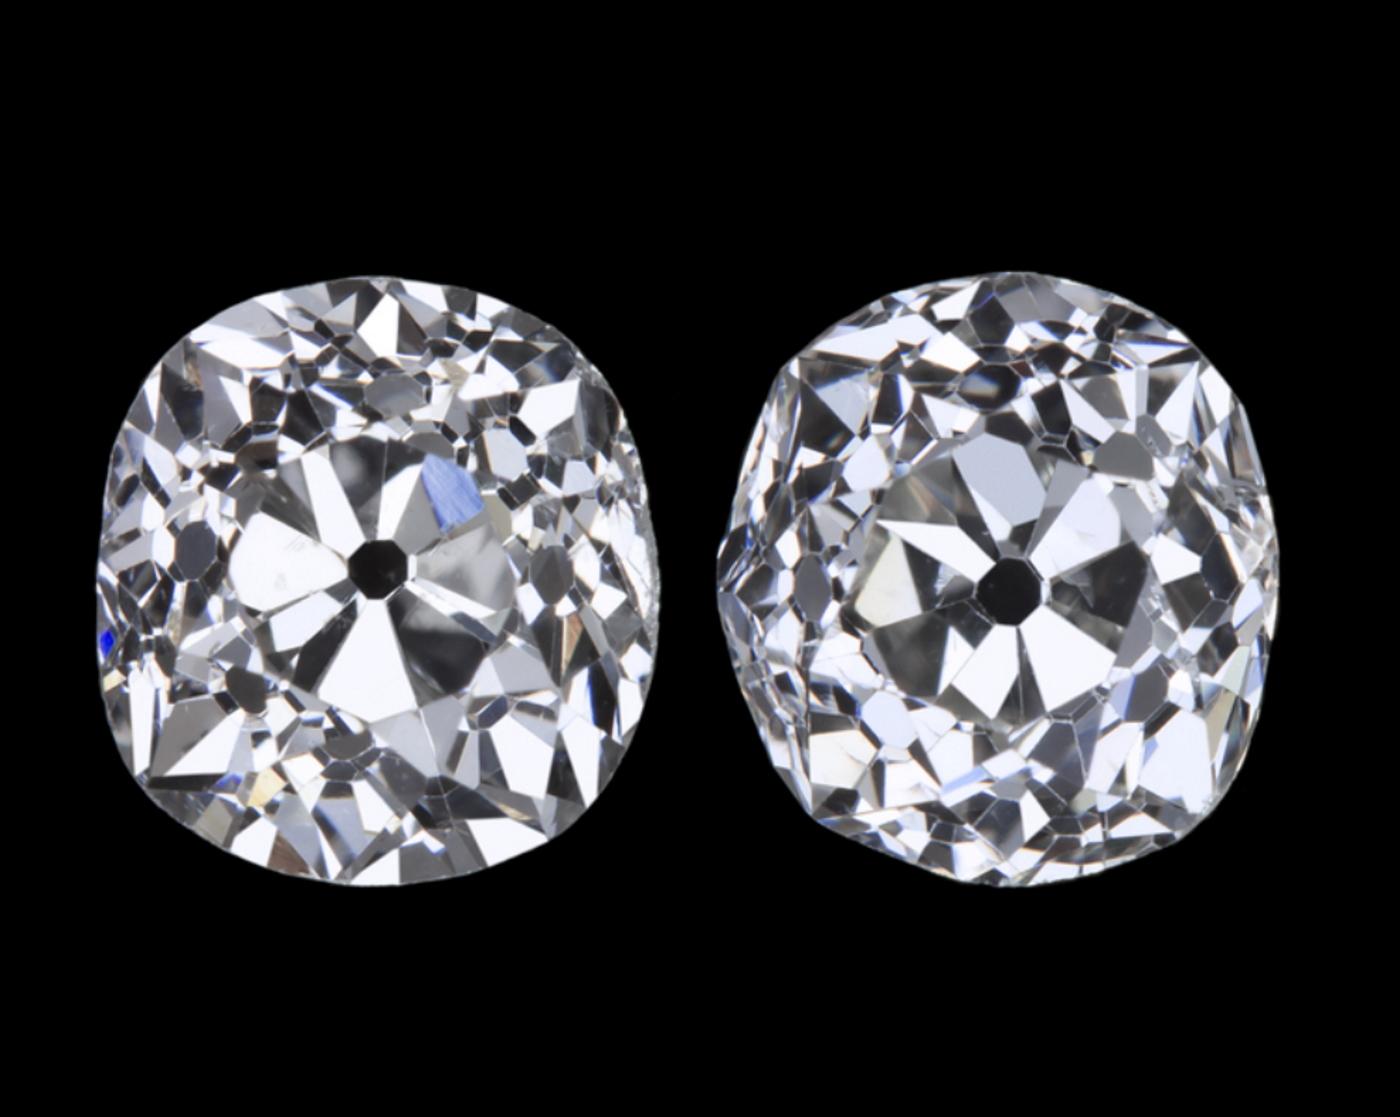 Something extraordinary a pair of G H Color 

This gorgeous and rare 2 carat antique matched pair of old mine cut diamonds is bright white, eye clean, full of old world charm, and dazzling with phenomenal sparkle! Cut by hand over a century in the